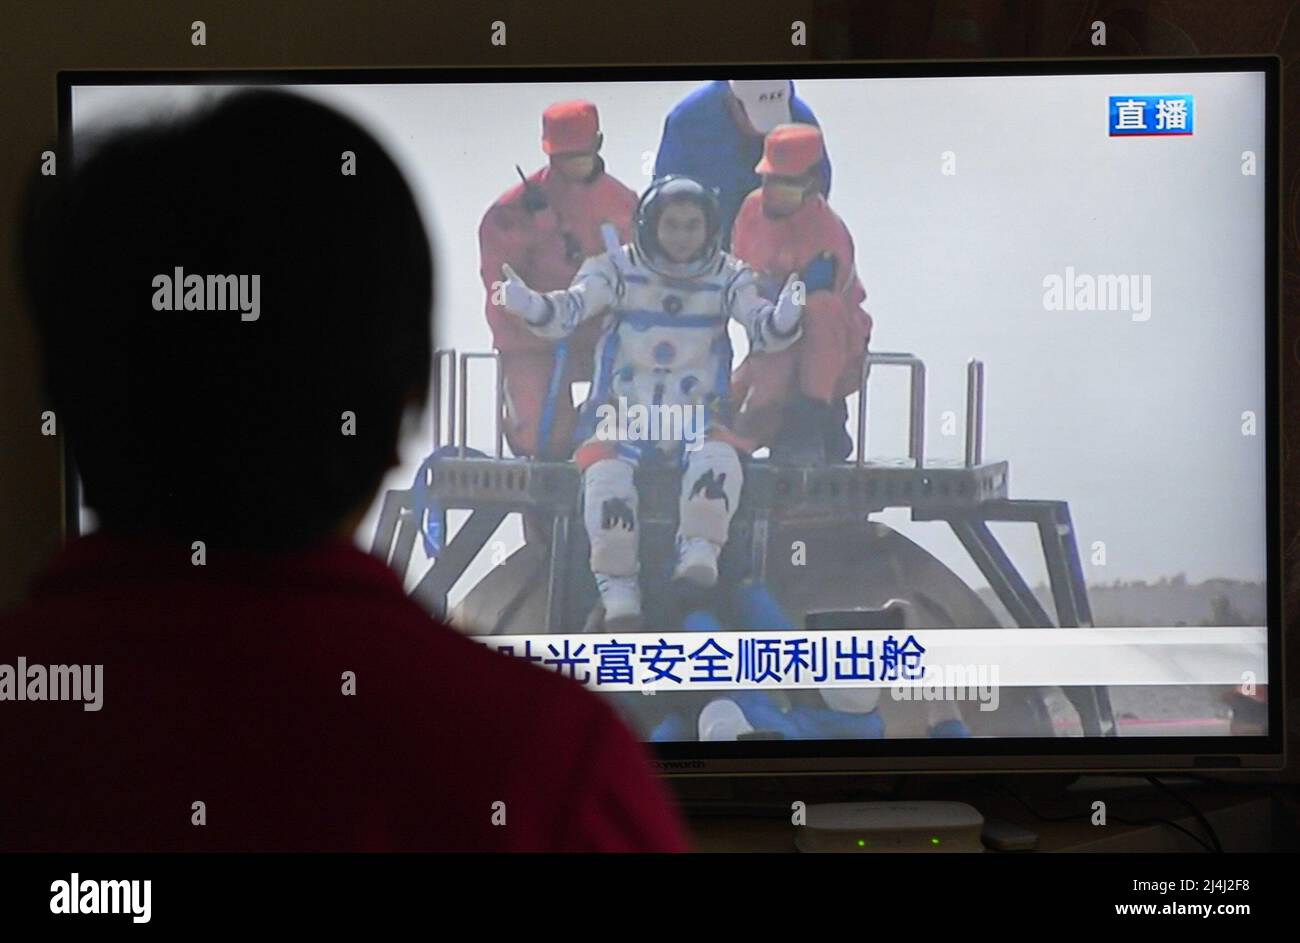 A woman watches a live TV broadcast of the successful landing of the Shenzhou XIII re-entry module with the astronaut Ye Guangfu on the TV screen. After orbiting Earth for six months, the three crew members of China's Shenzhou XIII mission departed from the Tiangong space station. They returned to the mother planet on Saturday morning, finishing the nation's longest human-crewed spaceflight. Major General Zhai Zhigang, the mission commander, Senior Colonel Wang Yaping, and Senior Colonel Ye Guangfu breathed fresh air for the first time after the half-year space journey as ground recovery perso Stock Photo